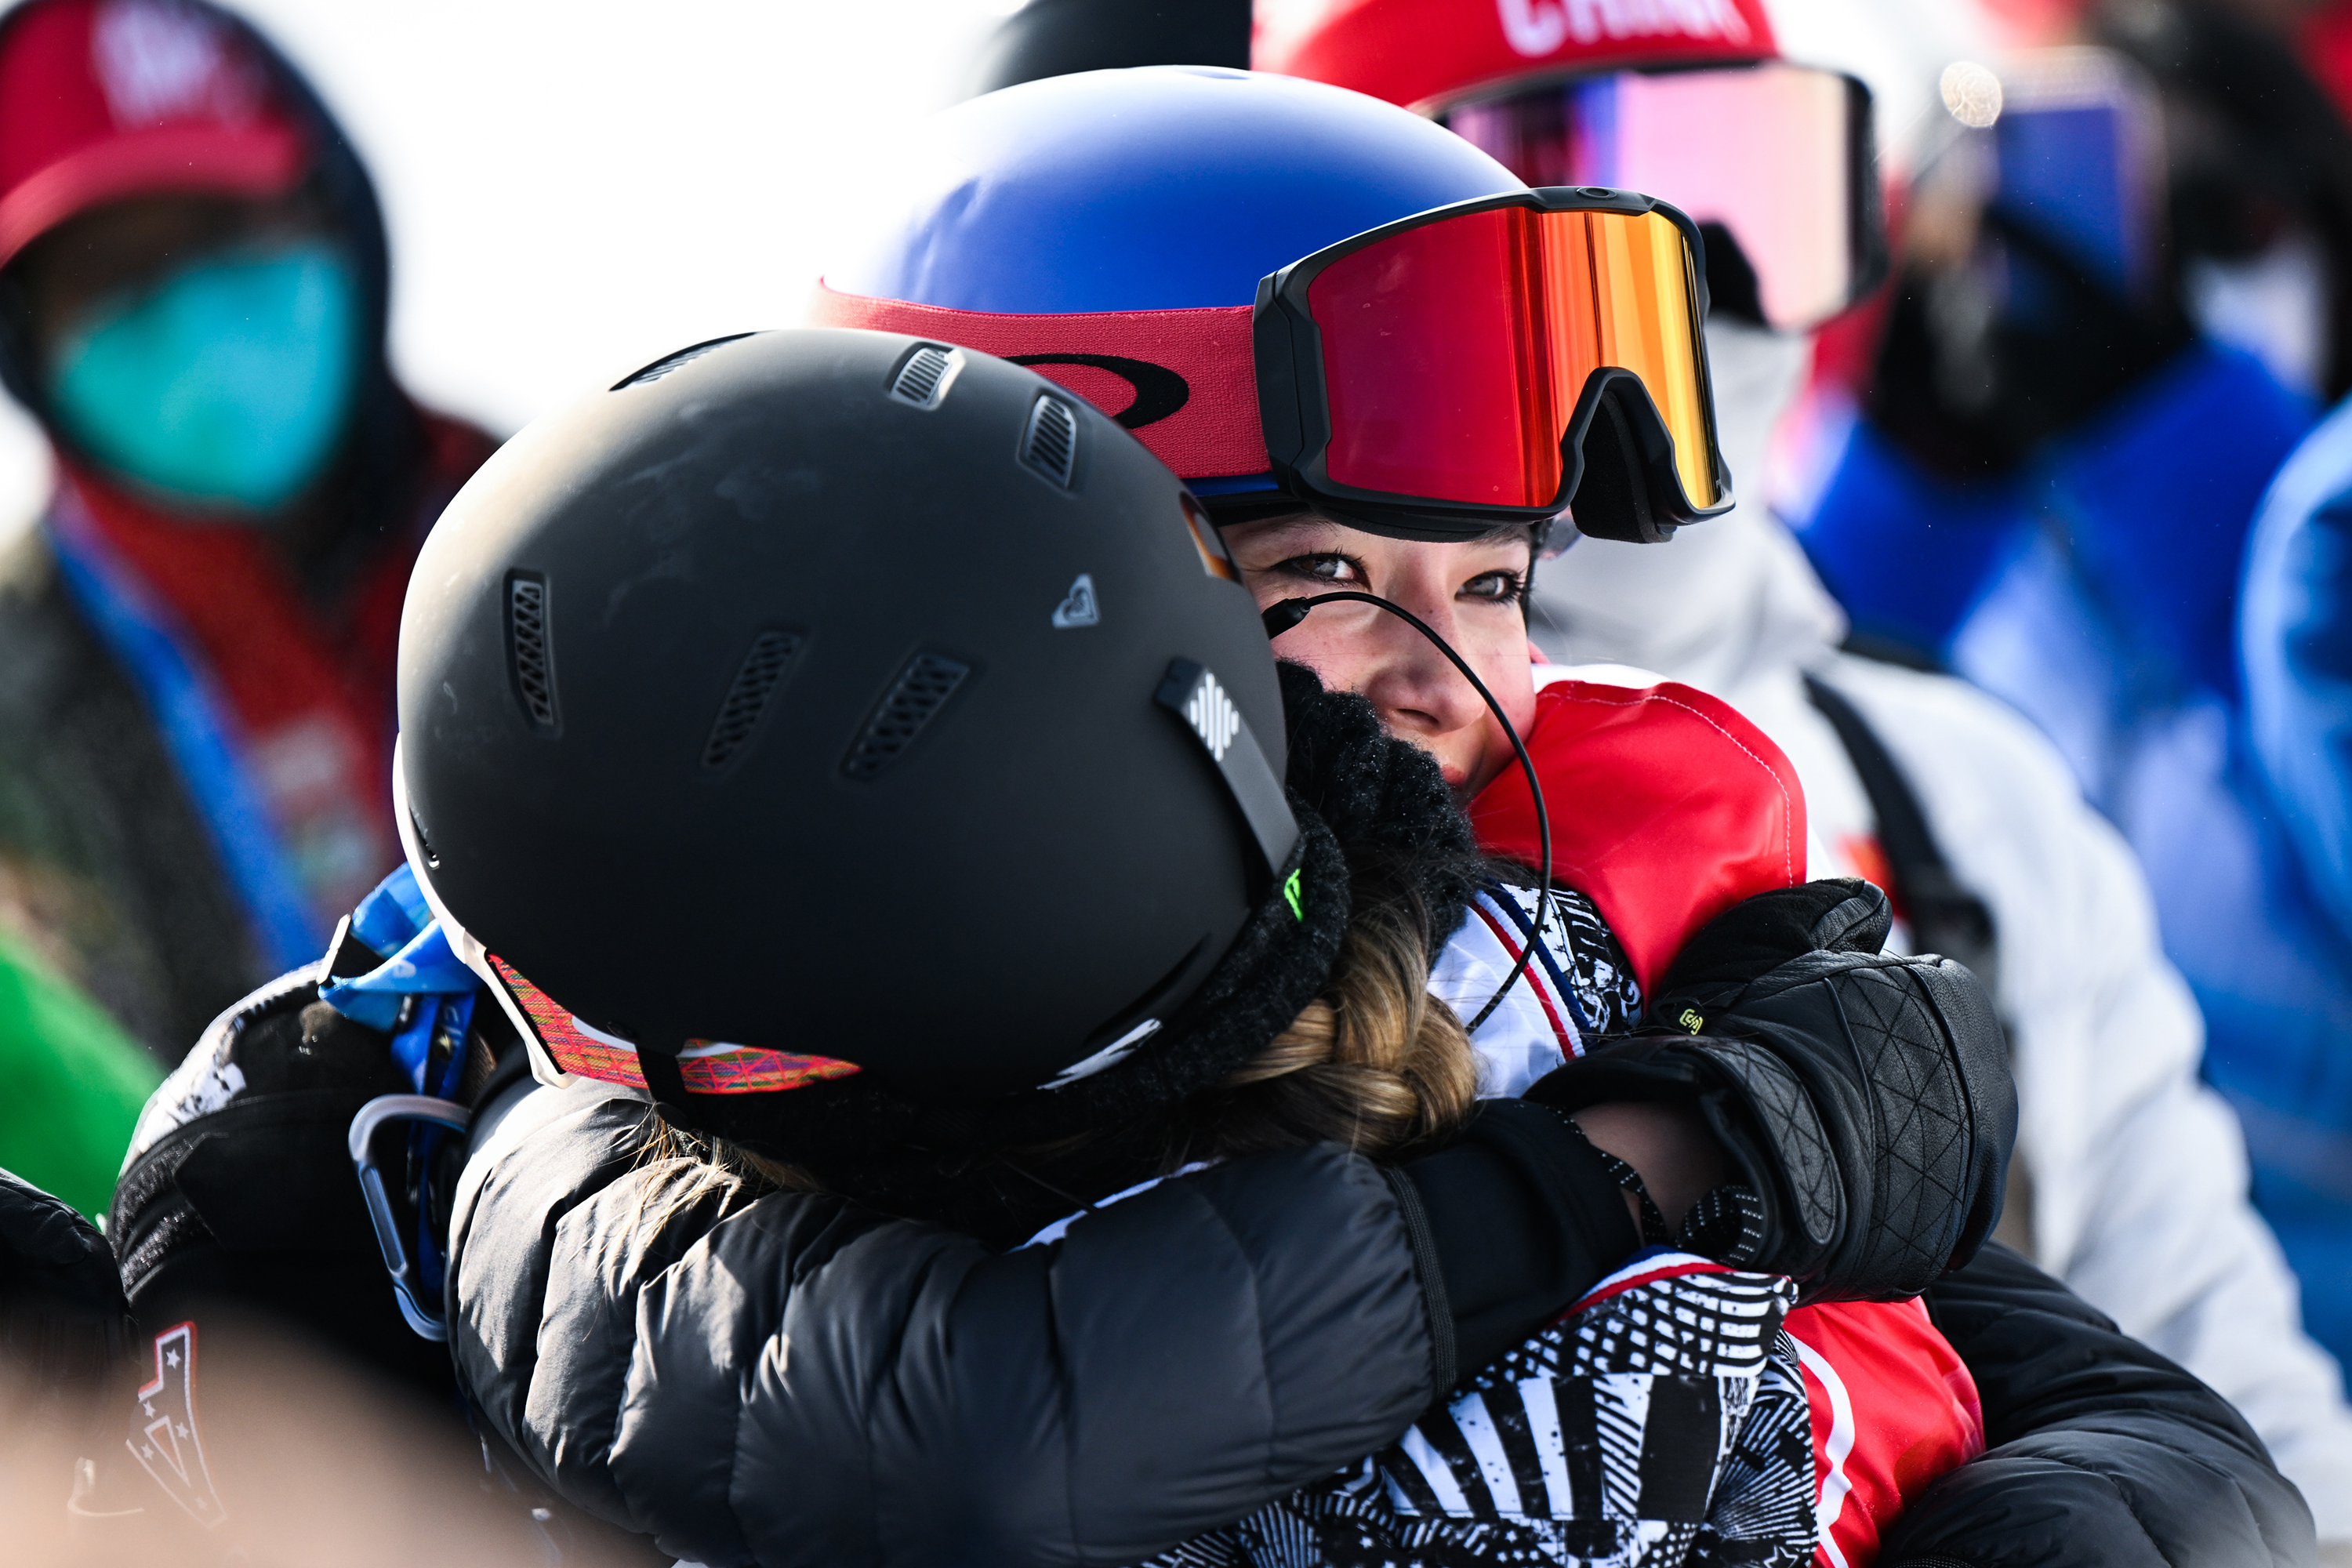 Chloe Kim celebrates with Eileen Gu after winning the gold medal during the women's snowboard halfpipe final on Thursday.